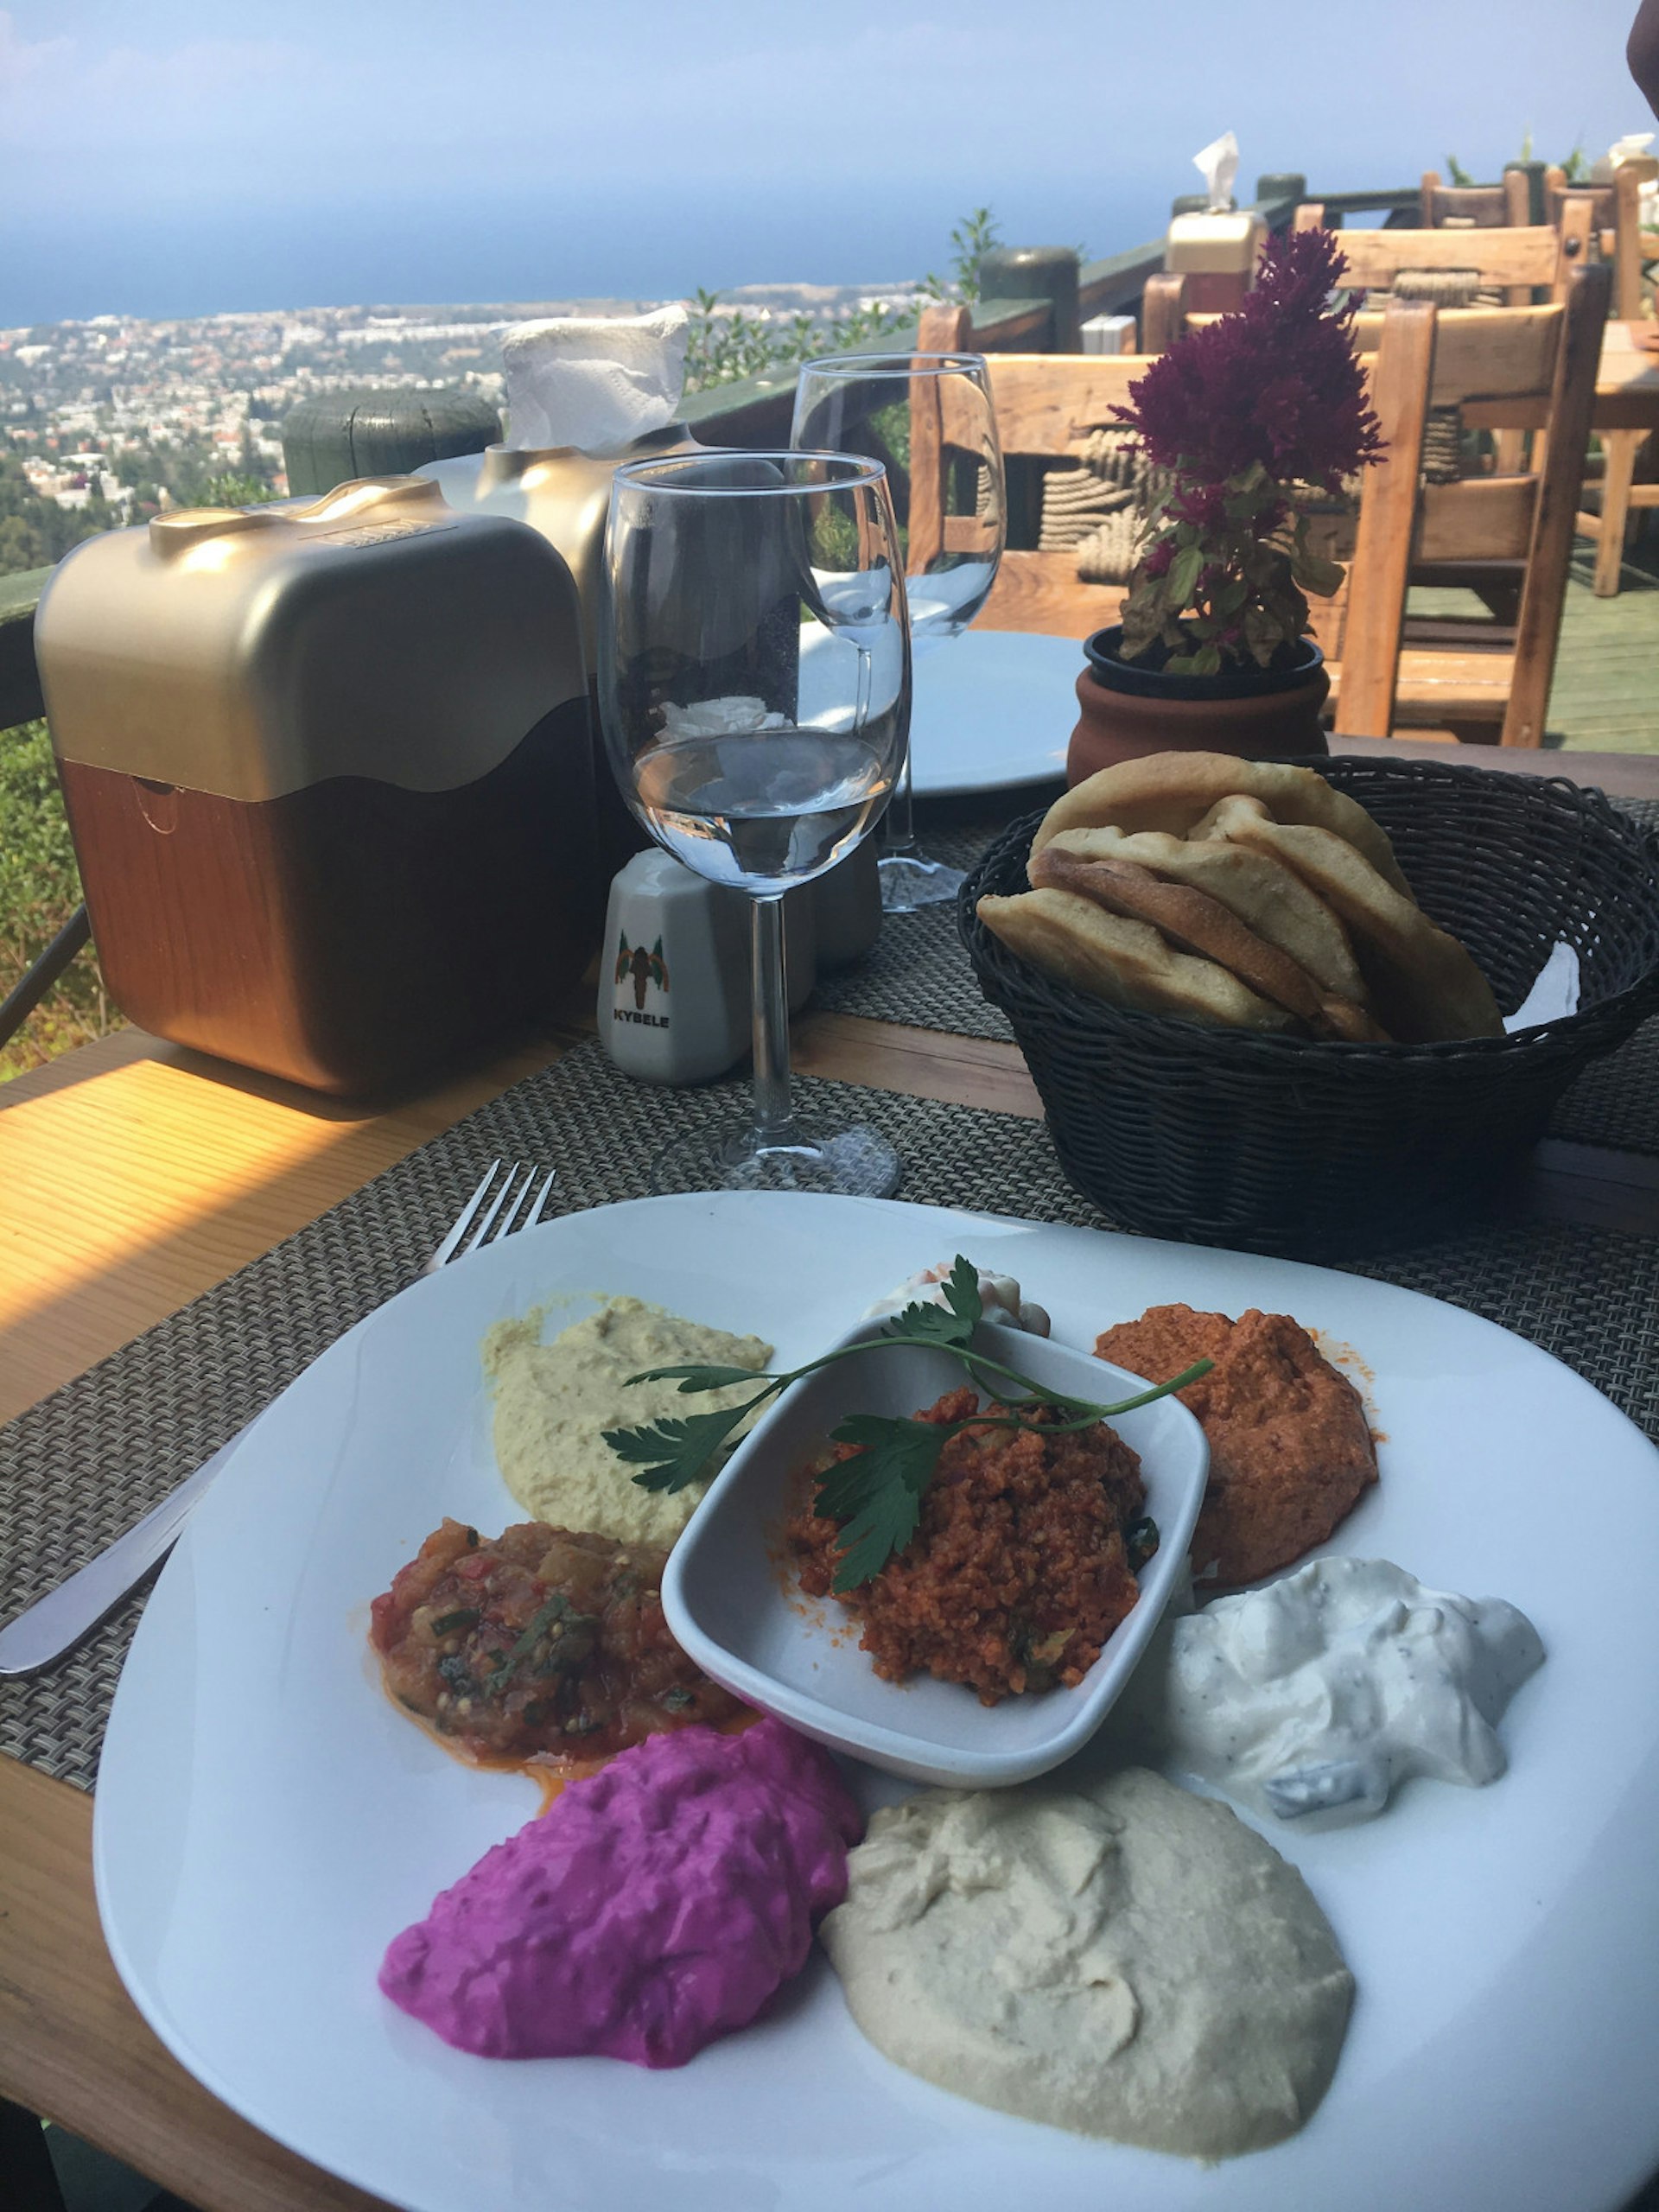 Colourful meze-style lunch starters at Kybele restaurant in Bellapais village © Brana Vladisavljevic / Lonely Planet